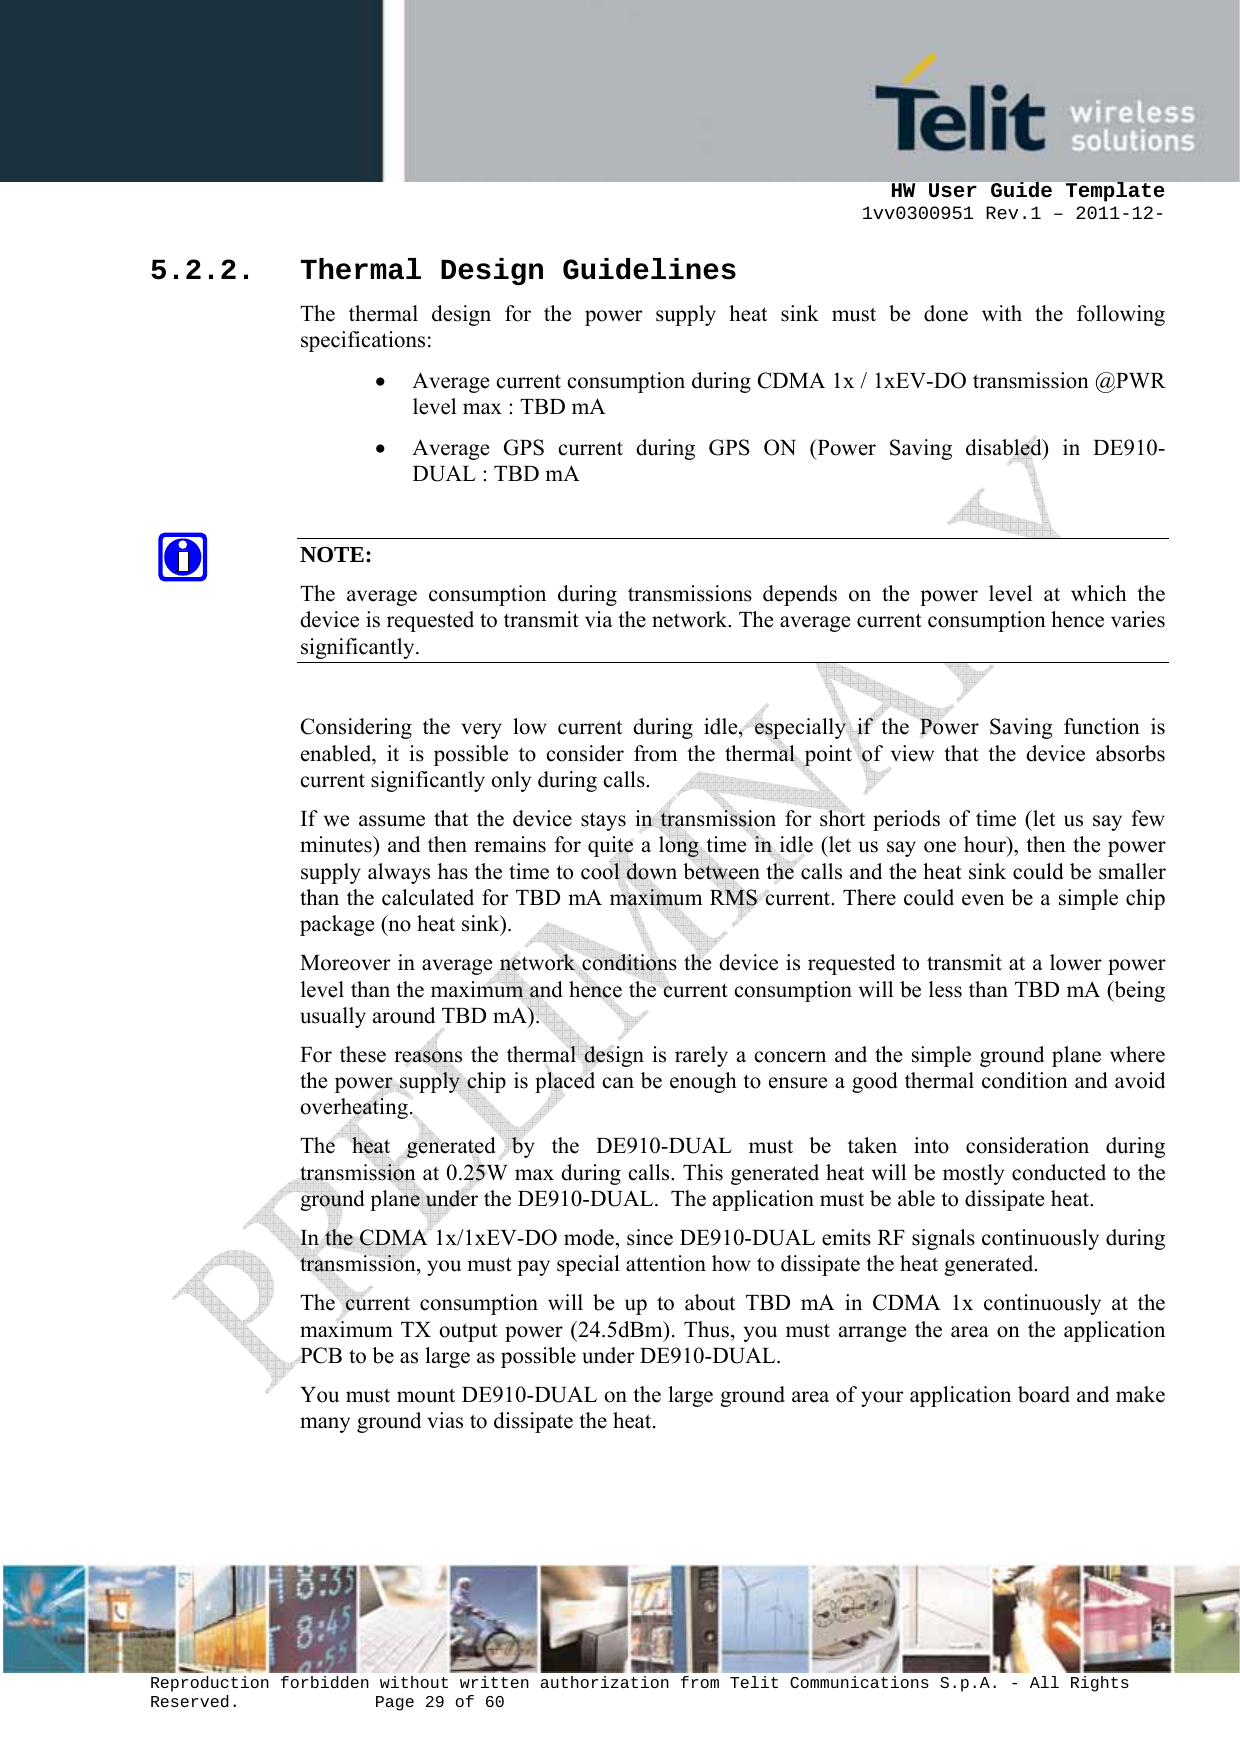      HW User Guide Template 1vv0300951 Rev.1 – 2011-12-  Reproduction forbidden without written authorization from Telit Communications S.p.A. - All Rights Reserved.    Page 29 of 60                                                     5.2.2. Thermal Design Guidelines The thermal design for the power supply heat sink must be done with the following specifications: • Average current consumption during CDMA 1x / 1xEV-DO transmission @PWR level max : TBD mA • Average GPS current during GPS ON (Power Saving disabled) in DE910-DUAL : TBD mA  NOTE: The average consumption during transmissions depends on the power level at which the device is requested to transmit via the network. The average current consumption hence varies significantly.  Considering the very low current during idle, especially if the Power Saving function is enabled, it is possible to consider from the thermal point of view that the device absorbs current significantly only during calls.  If we assume that the device stays in transmission for short periods of time (let us say few minutes) and then remains for quite a long time in idle (let us say one hour), then the power supply always has the time to cool down between the calls and the heat sink could be smaller than the calculated for TBD mA maximum RMS current. There could even be a simple chip package (no heat sink). Moreover in average network conditions the device is requested to transmit at a lower power level than the maximum and hence the current consumption will be less than TBD mA (being usually around TBD mA). For these reasons the thermal design is rarely a concern and the simple ground plane where the power supply chip is placed can be enough to ensure a good thermal condition and avoid overheating. The heat generated by the DE910-DUAL must be taken into consideration during transmission at 0.25W max during calls. This generated heat will be mostly conducted to the ground plane under the DE910-DUAL.  The application must be able to dissipate heat. In the CDMA 1x/1xEV-DO mode, since DE910-DUAL emits RF signals continuously during transmission, you must pay special attention how to dissipate the heat generated. The current consumption will be up to about TBD mA in CDMA 1x continuously at the maximum TX output power (24.5dBm). Thus, you must arrange the area on the application PCB to be as large as possible under DE910-DUAL. You must mount DE910-DUAL on the large ground area of your application board and make many ground vias to dissipate the heat. 